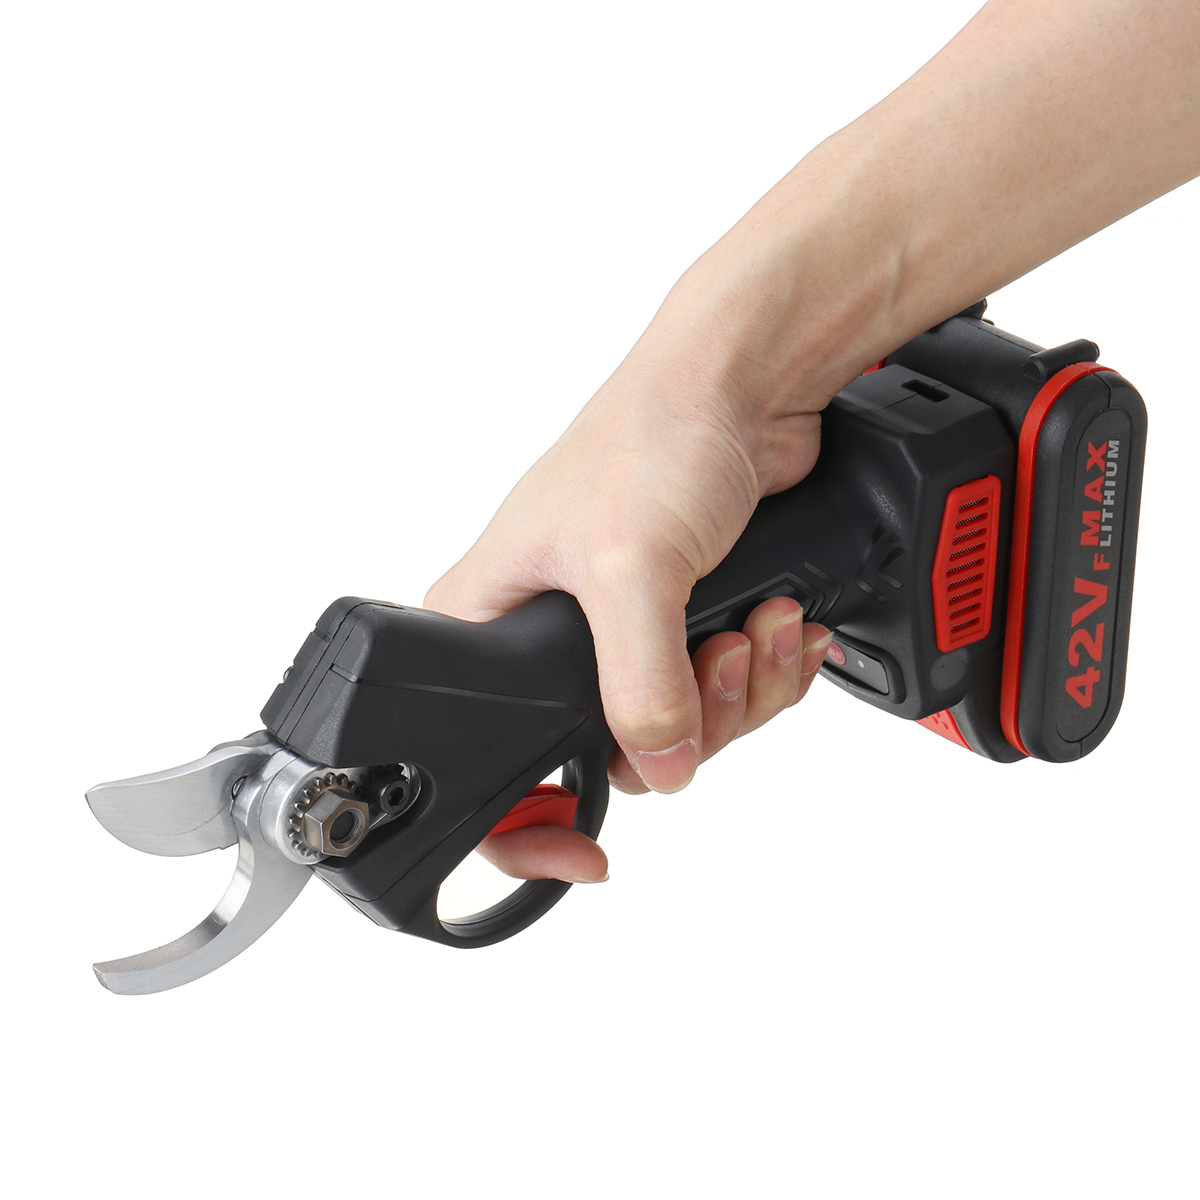 42VF-Rechargeable-Electric-Pruning-Shears-Scissors-Branch-Cutter-Garden-Tool-W-1-or-2-Li-ion-Battery-1709169-8